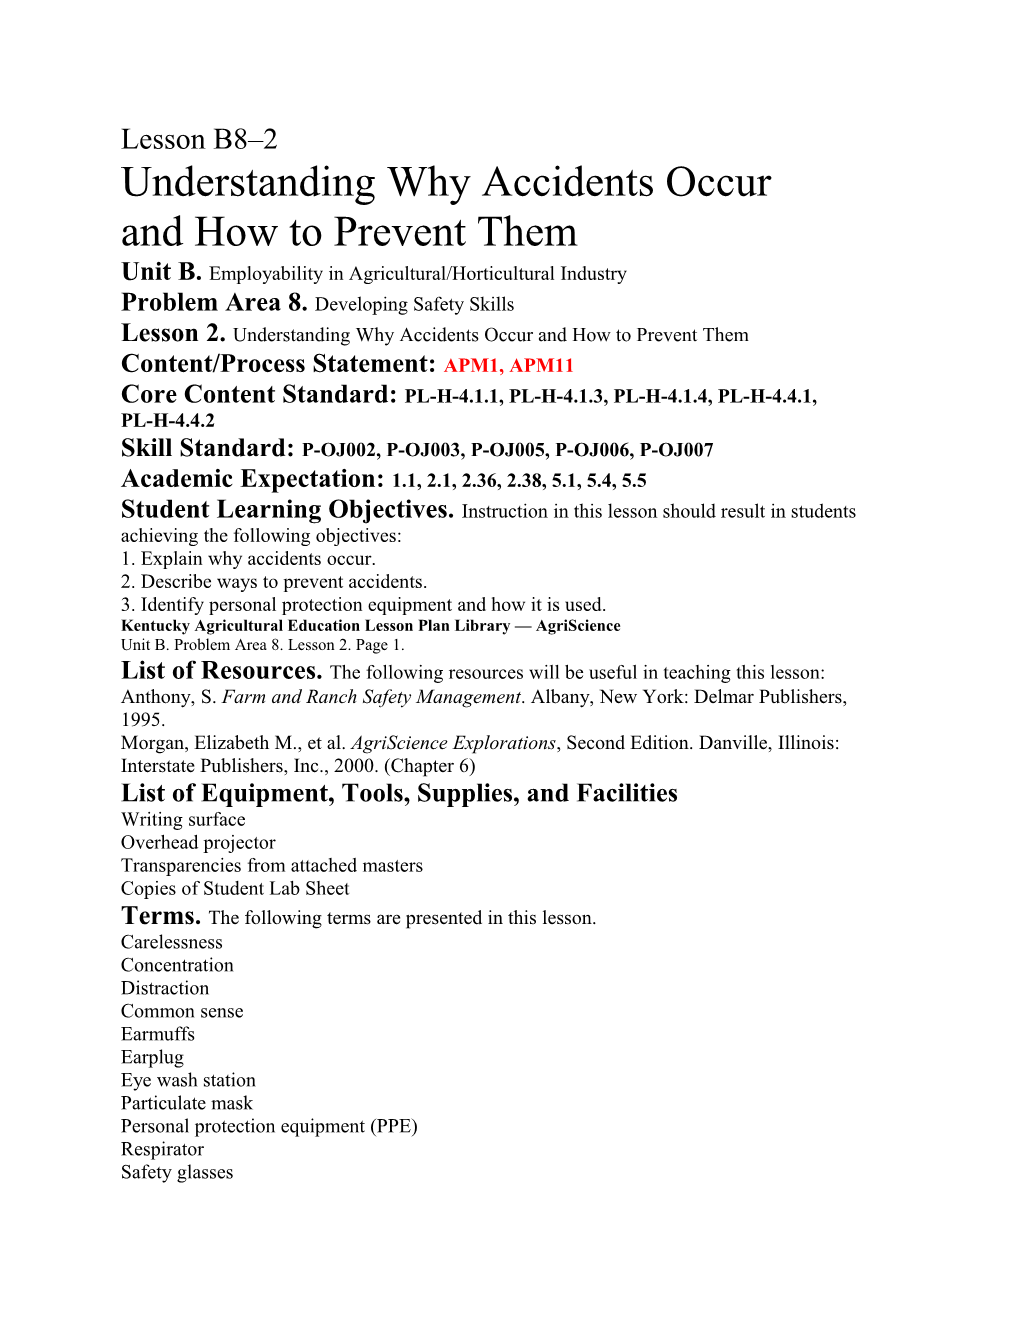 Understanding Why Accidents Occur